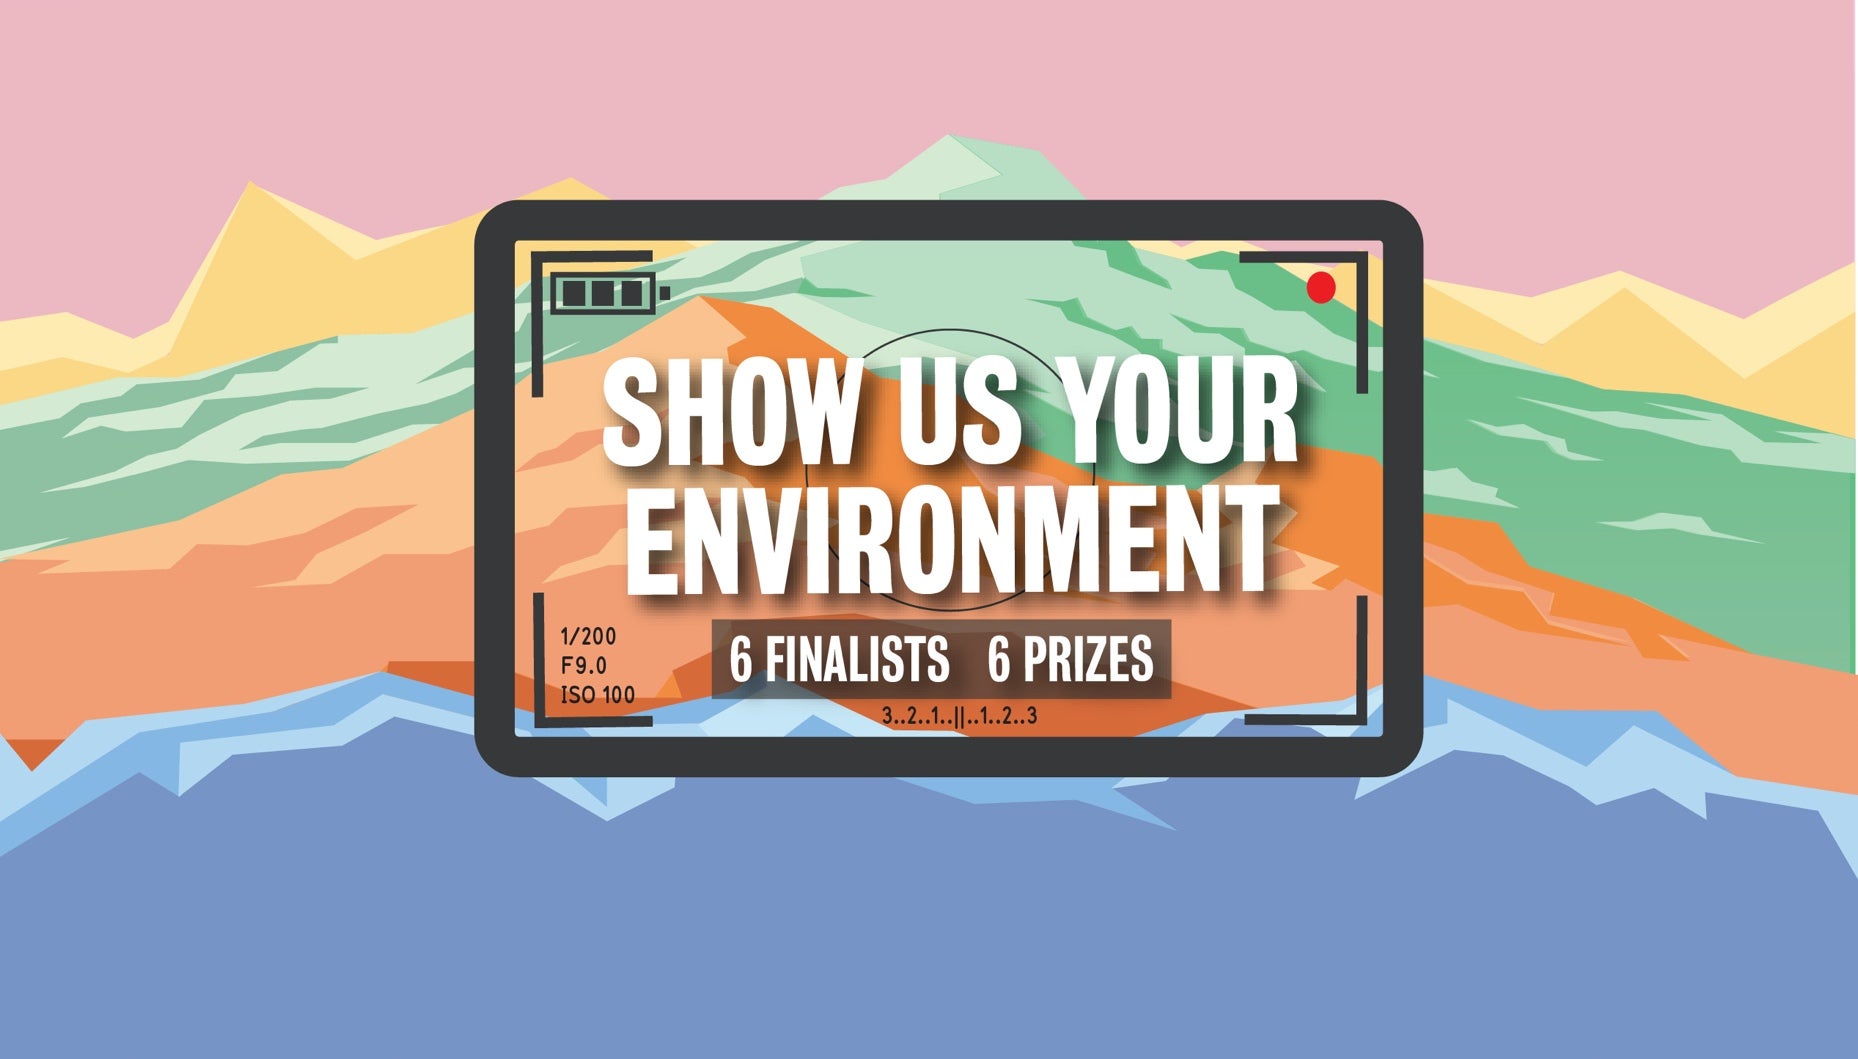 Show us your Environment. Six prizes, six winners!